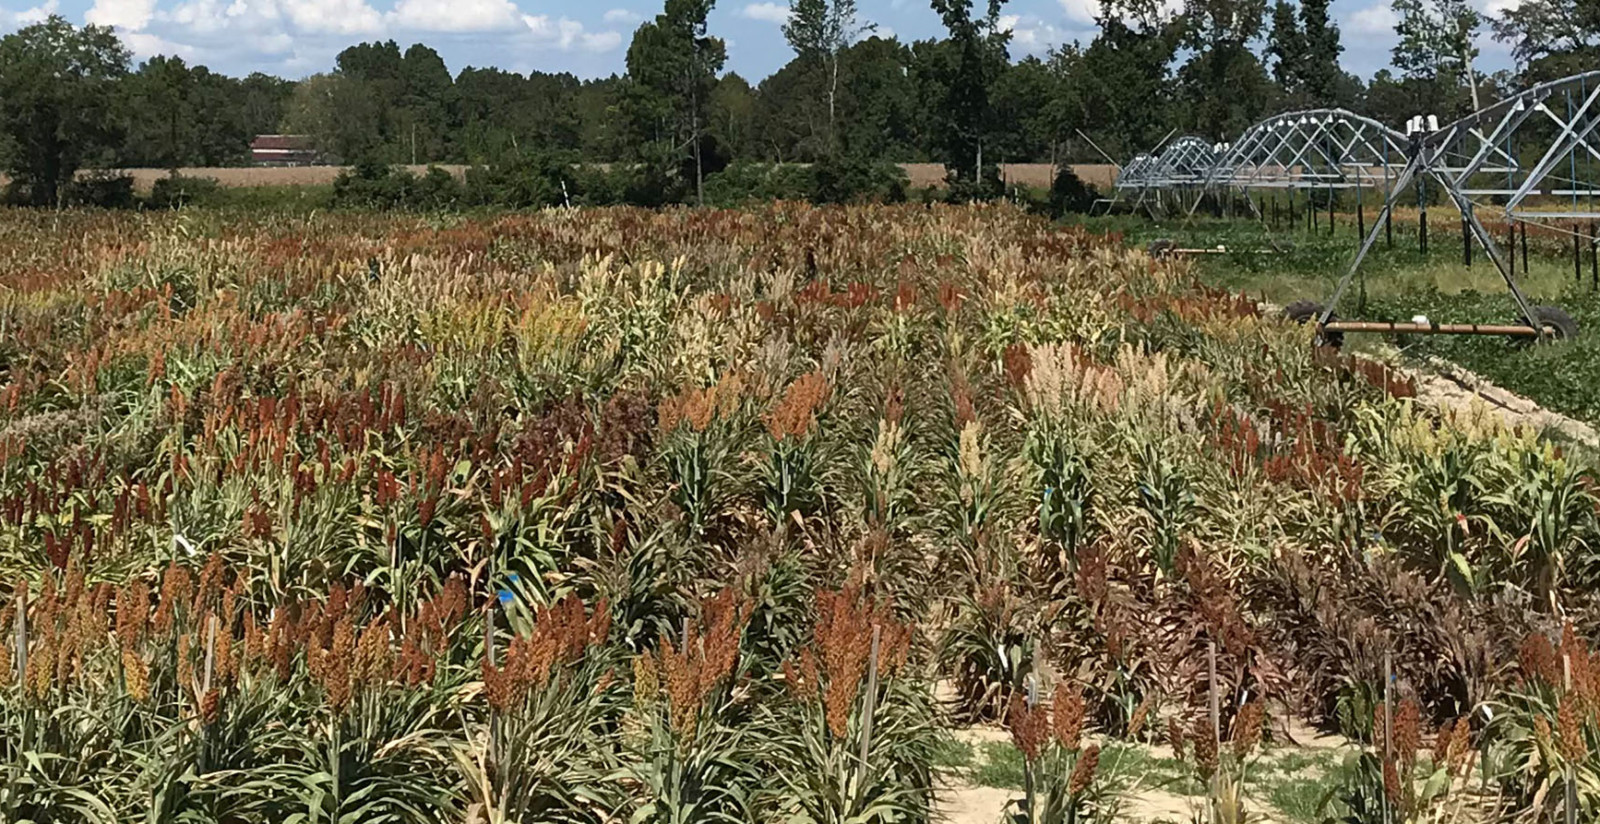 Grain sorghum grows in a field during commercial trials.